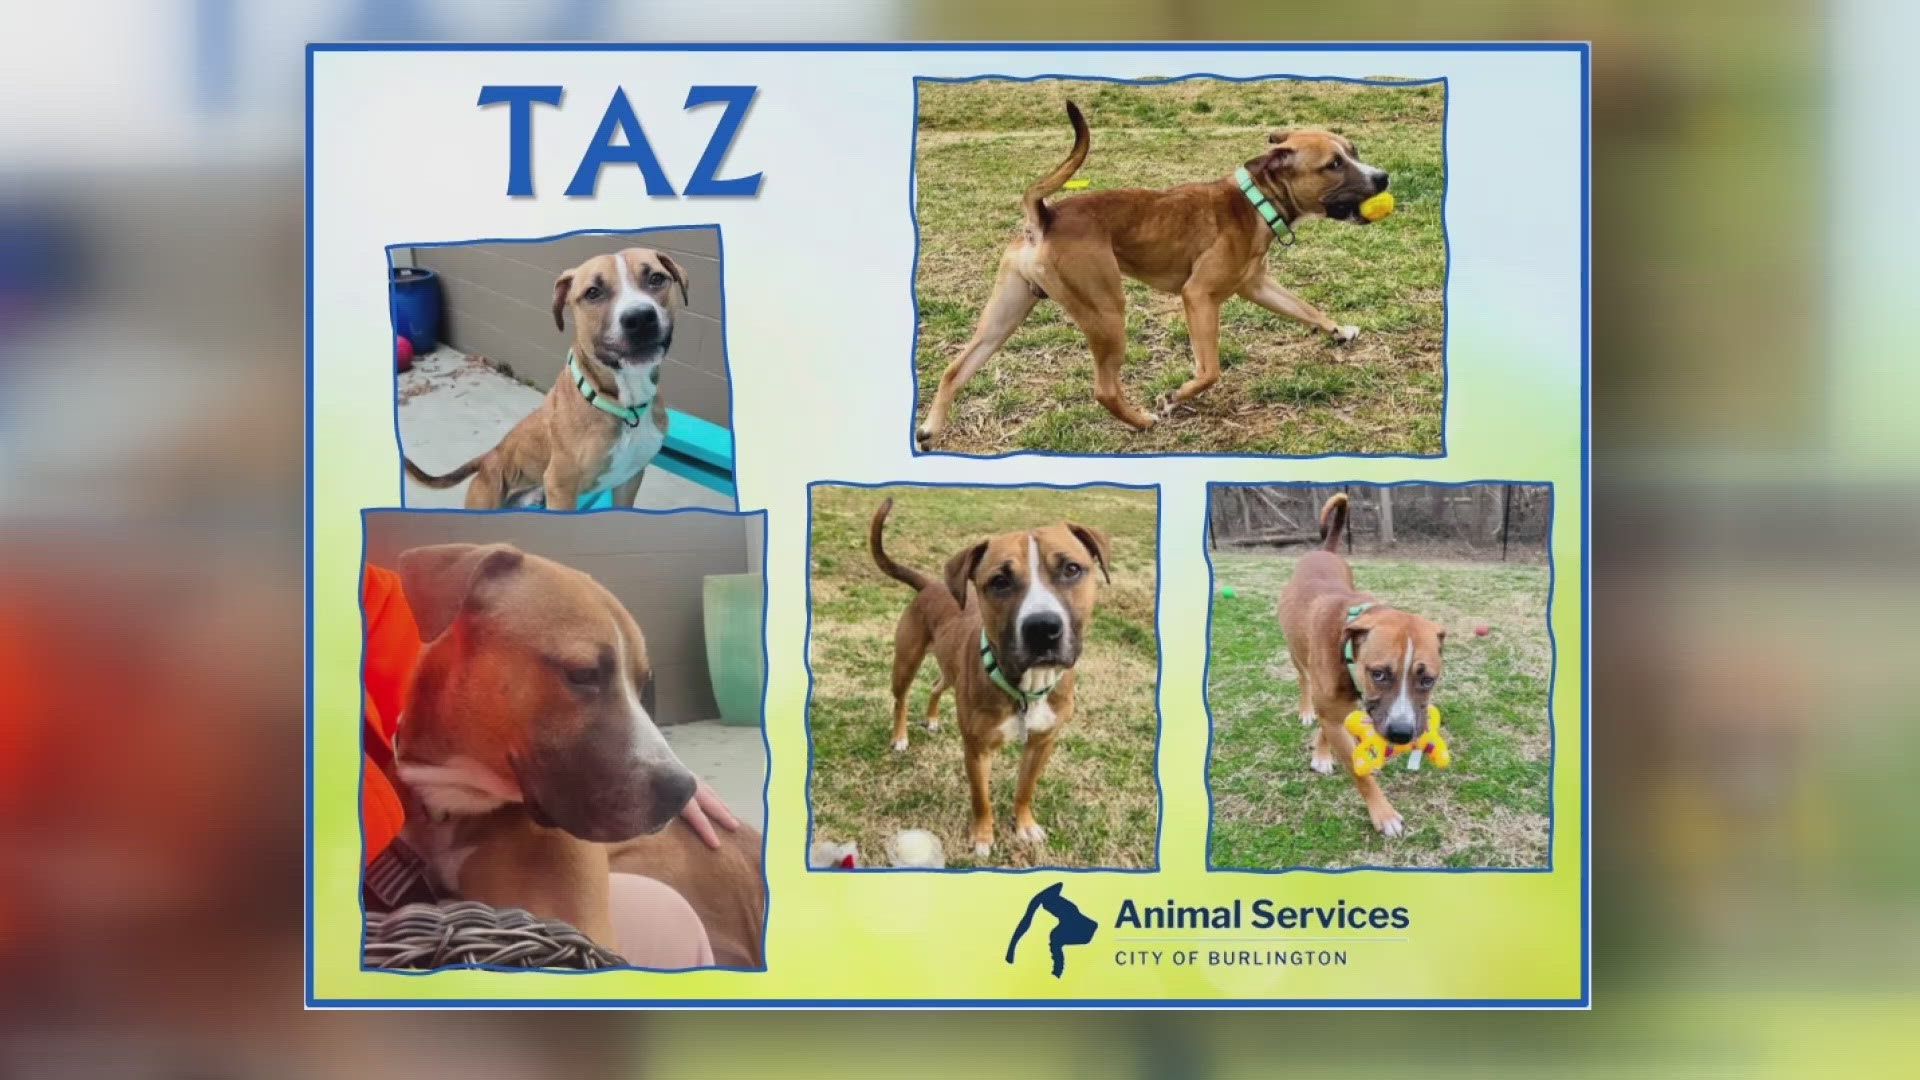 Let's get Taz adopted!